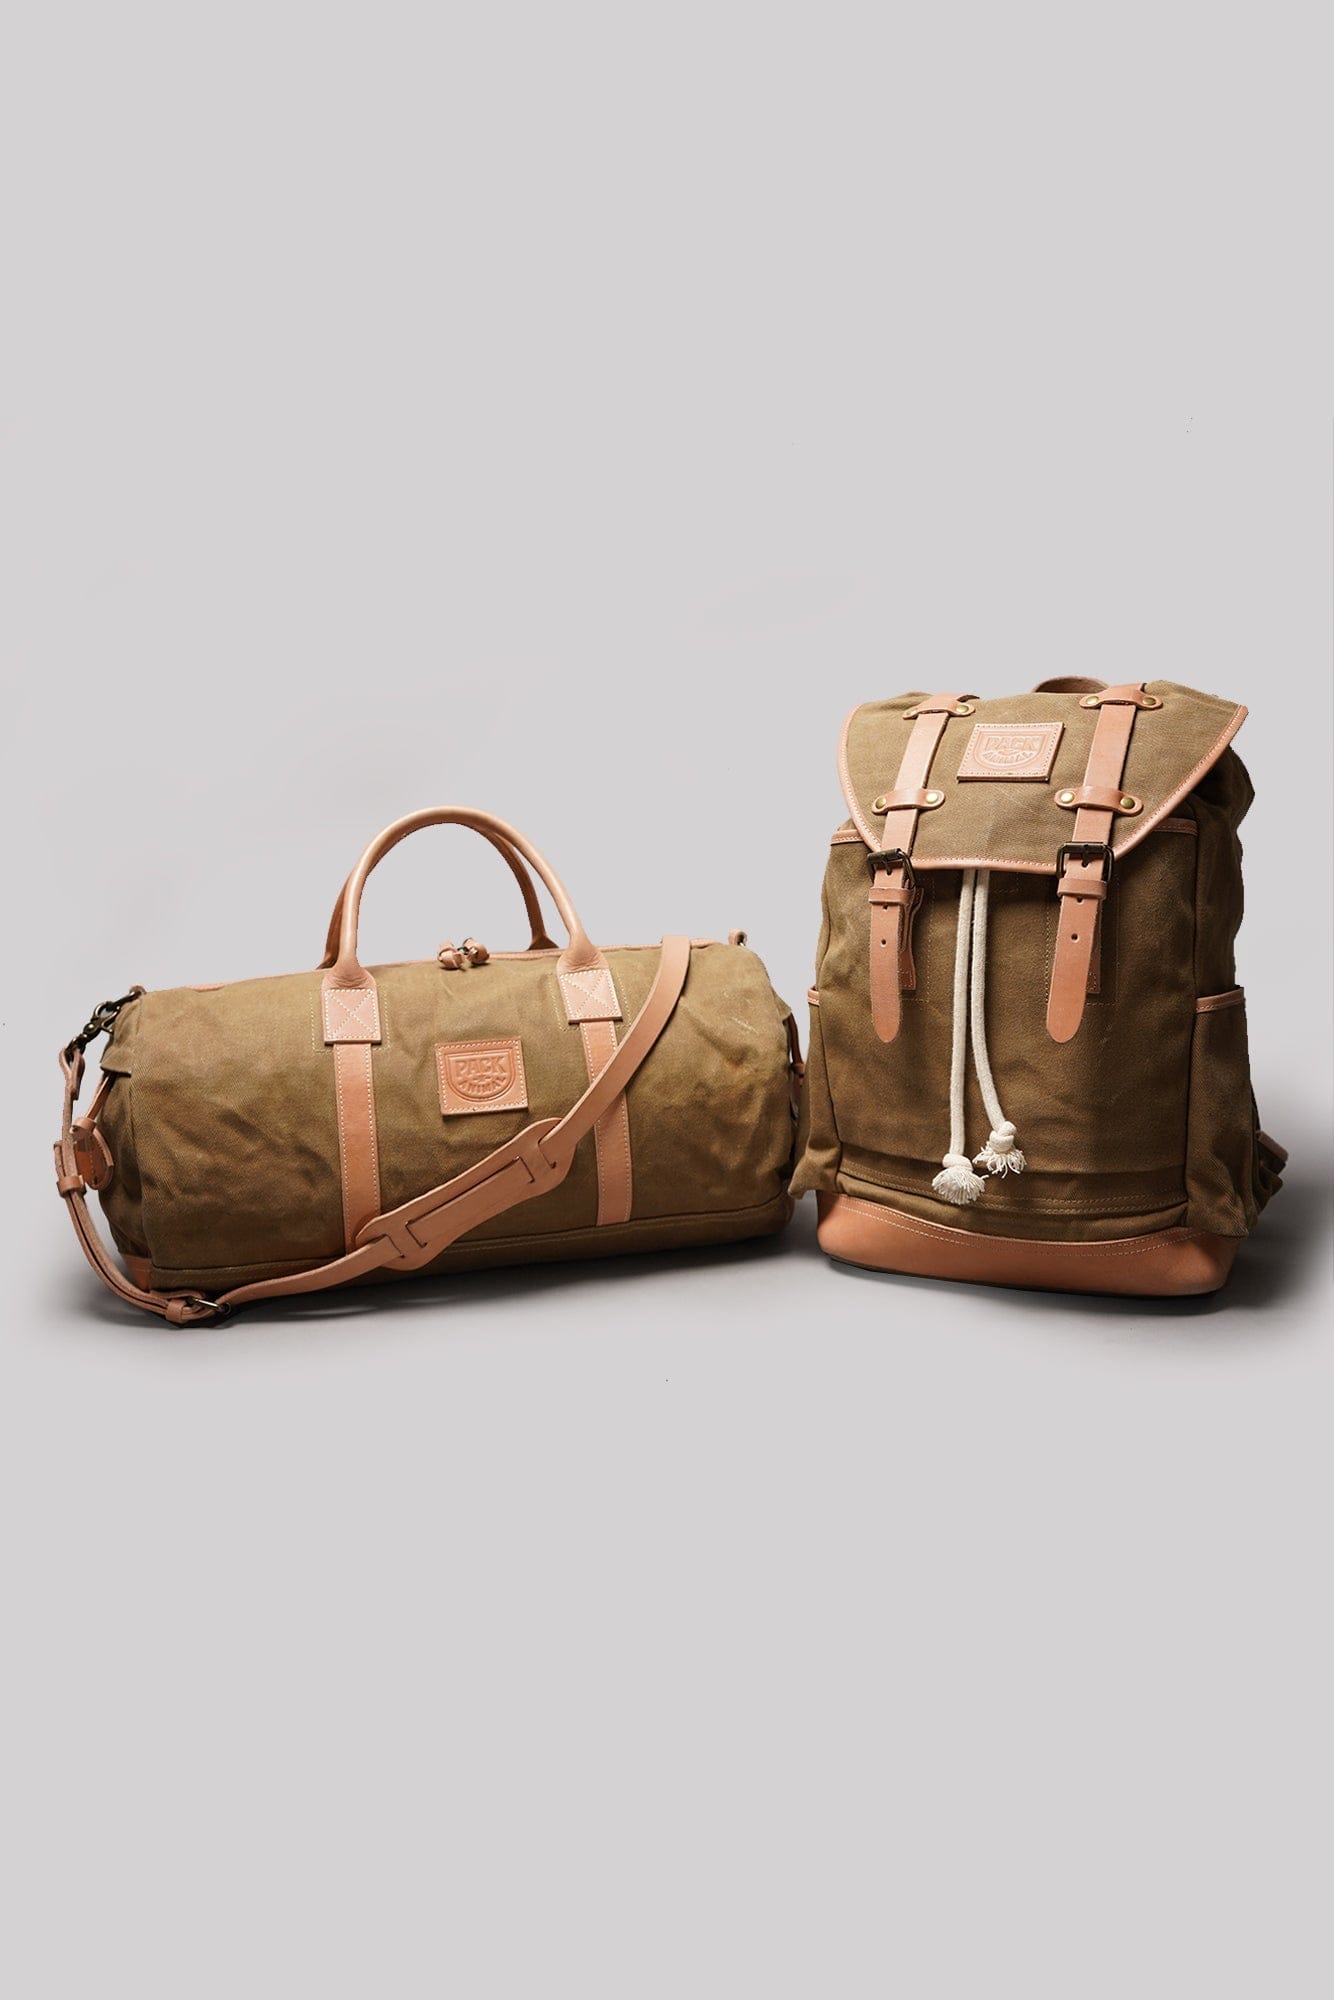 Pack Animal Heritage-Quality Waxed Canvas Gear Extra Mile Duffle (Camouflage)